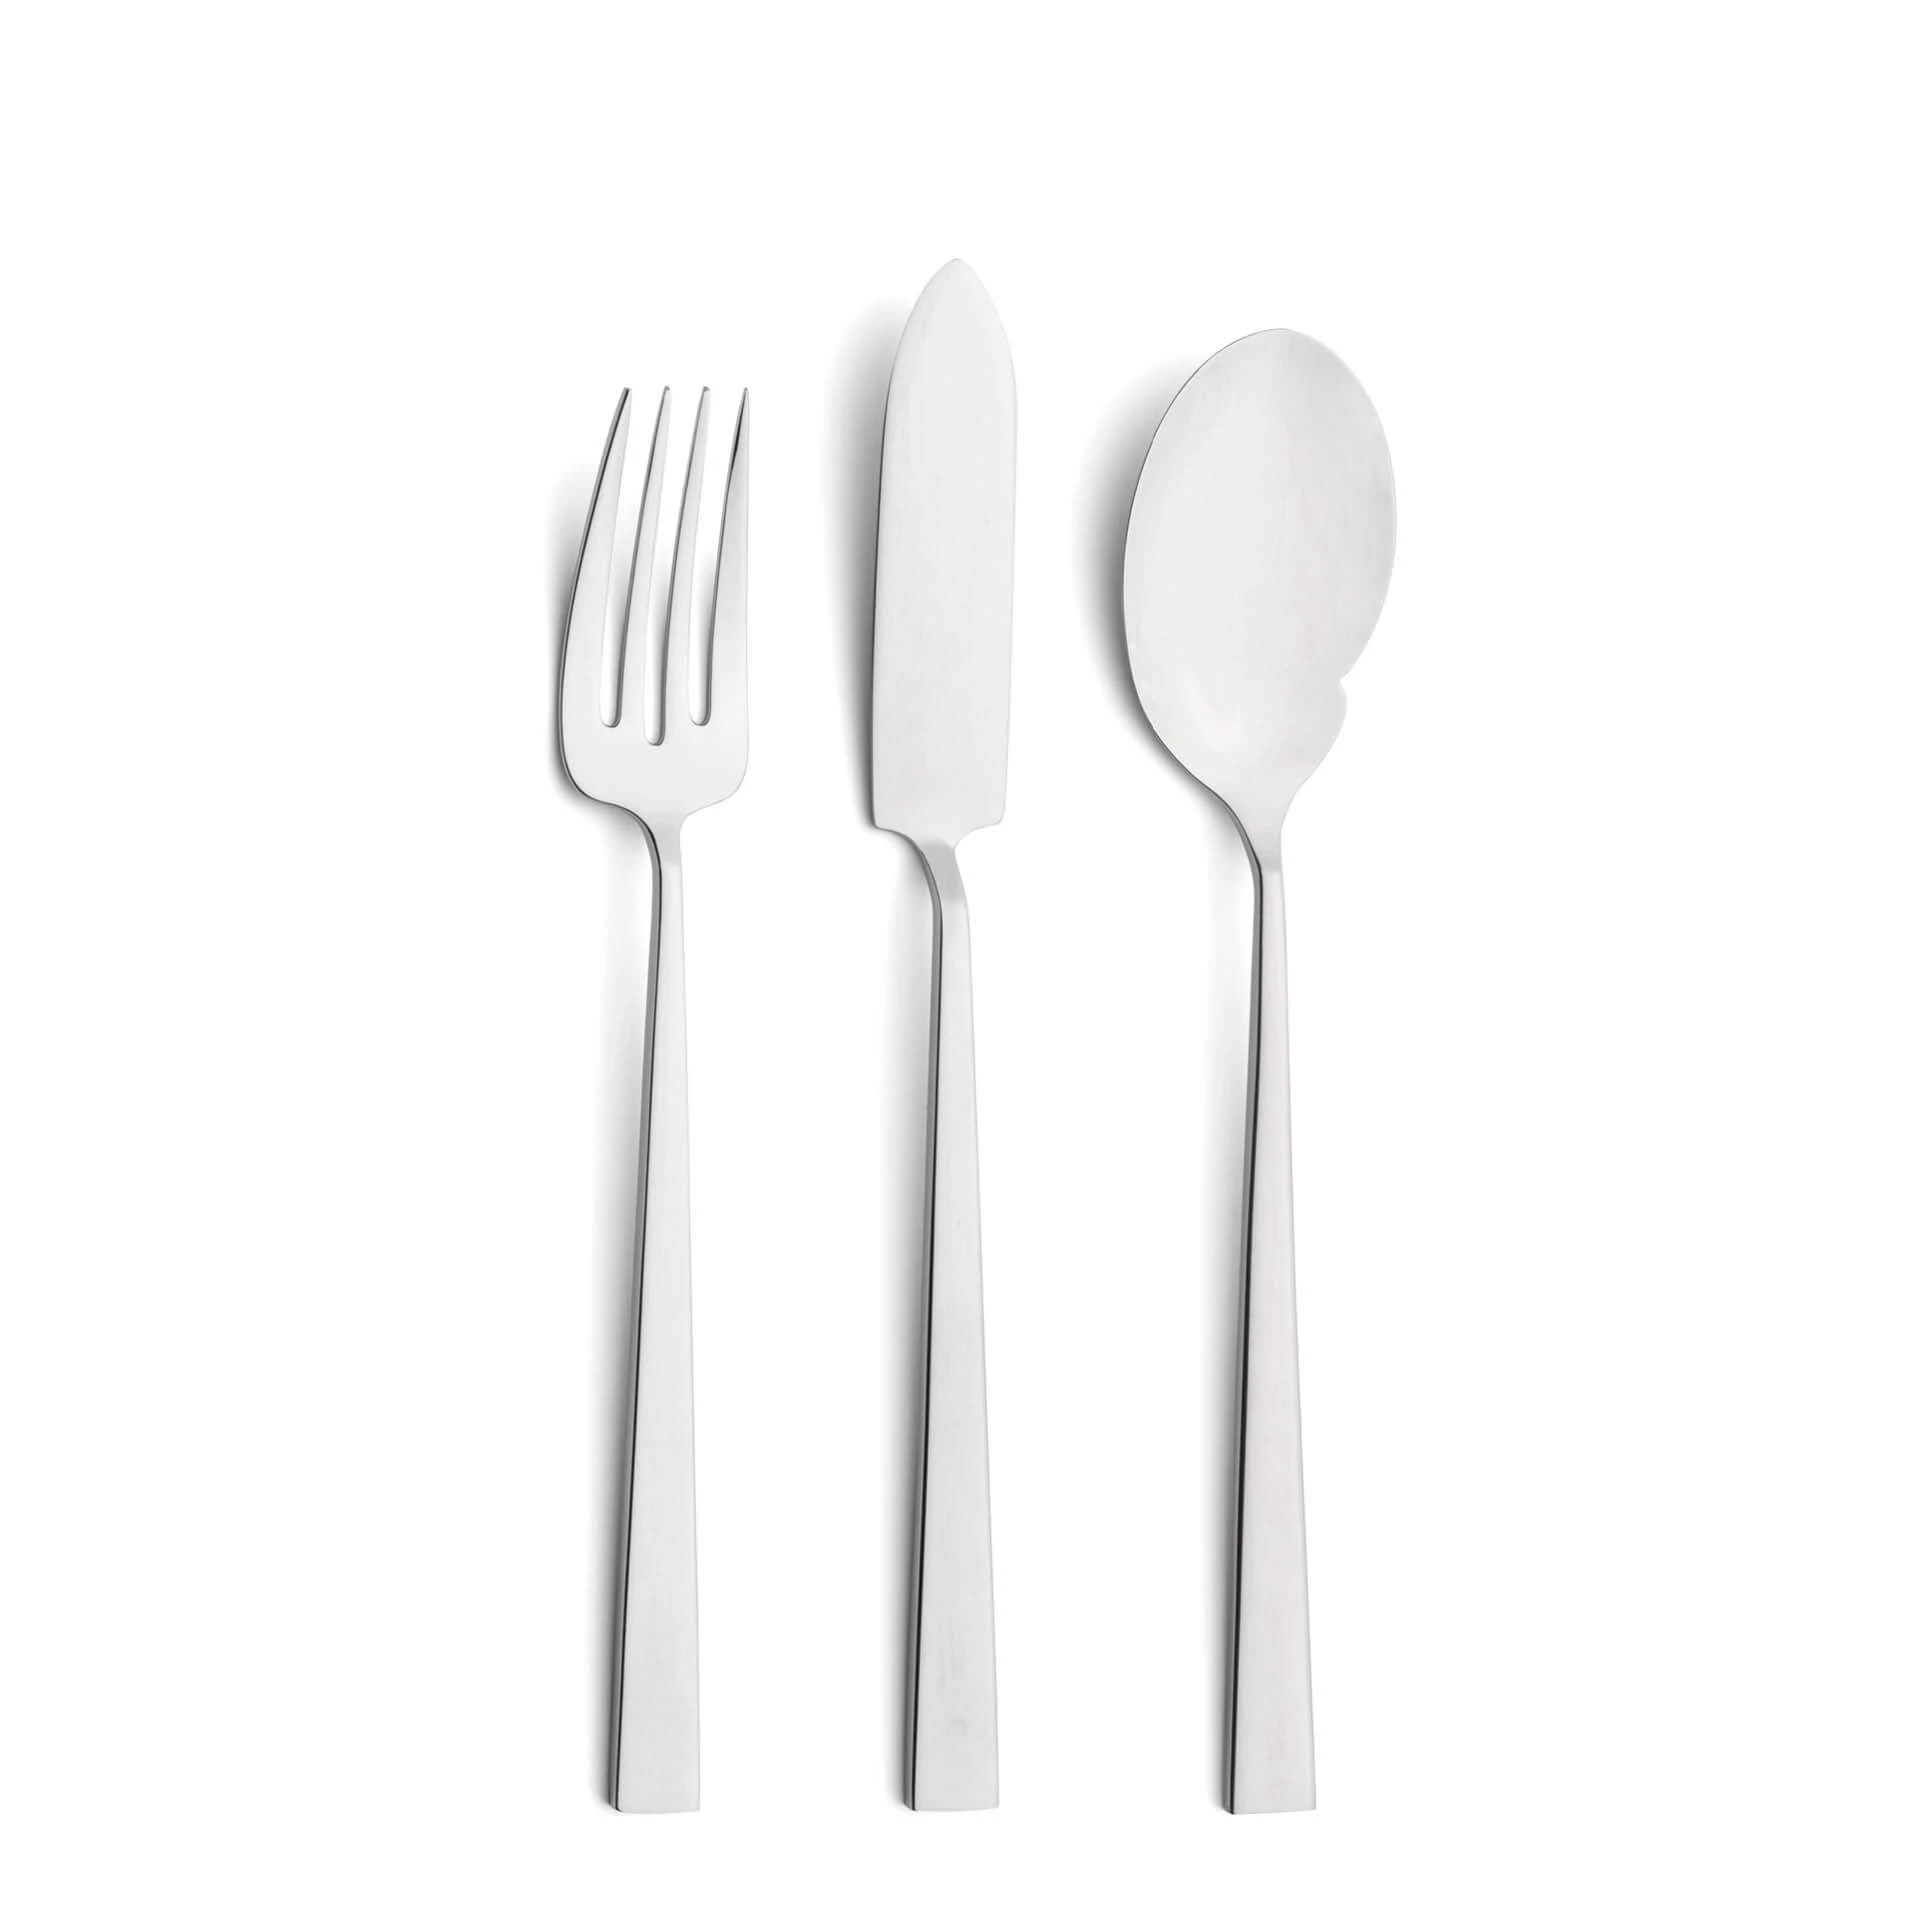 Cutipol Cutlery Bauhaus with fish fork, fish knife and gourmet spoon